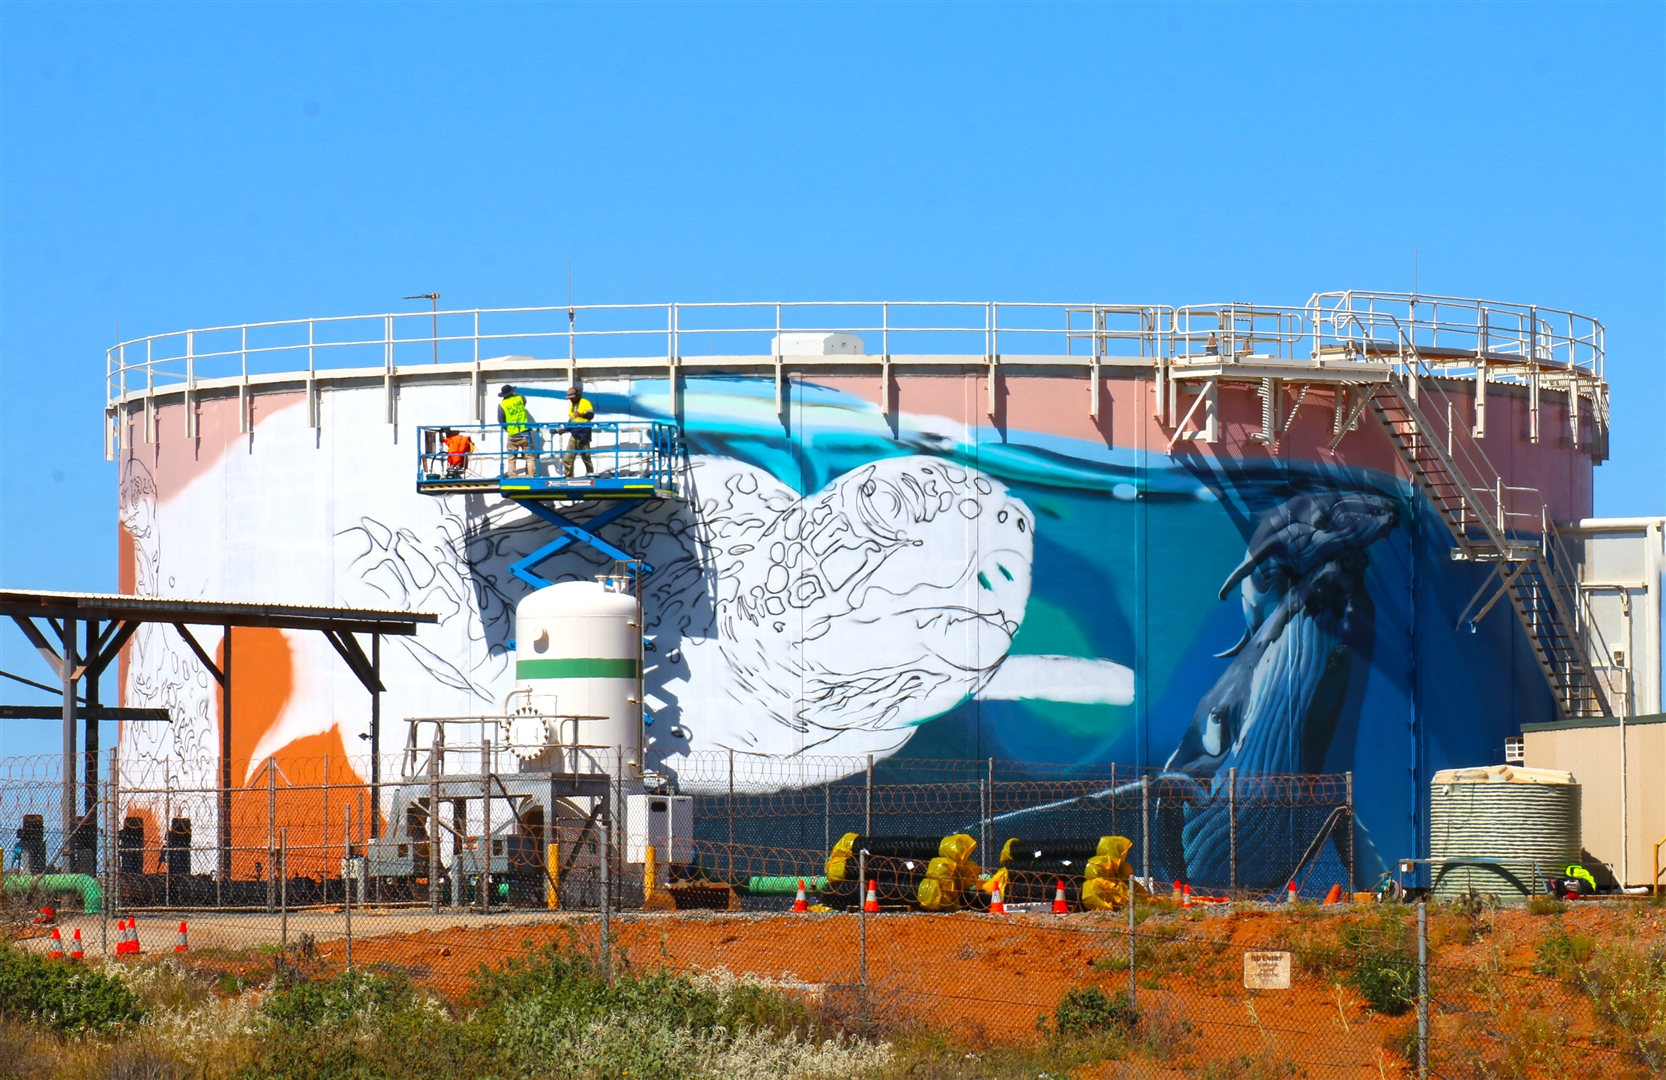 Onslow Water Tanks Mural Project